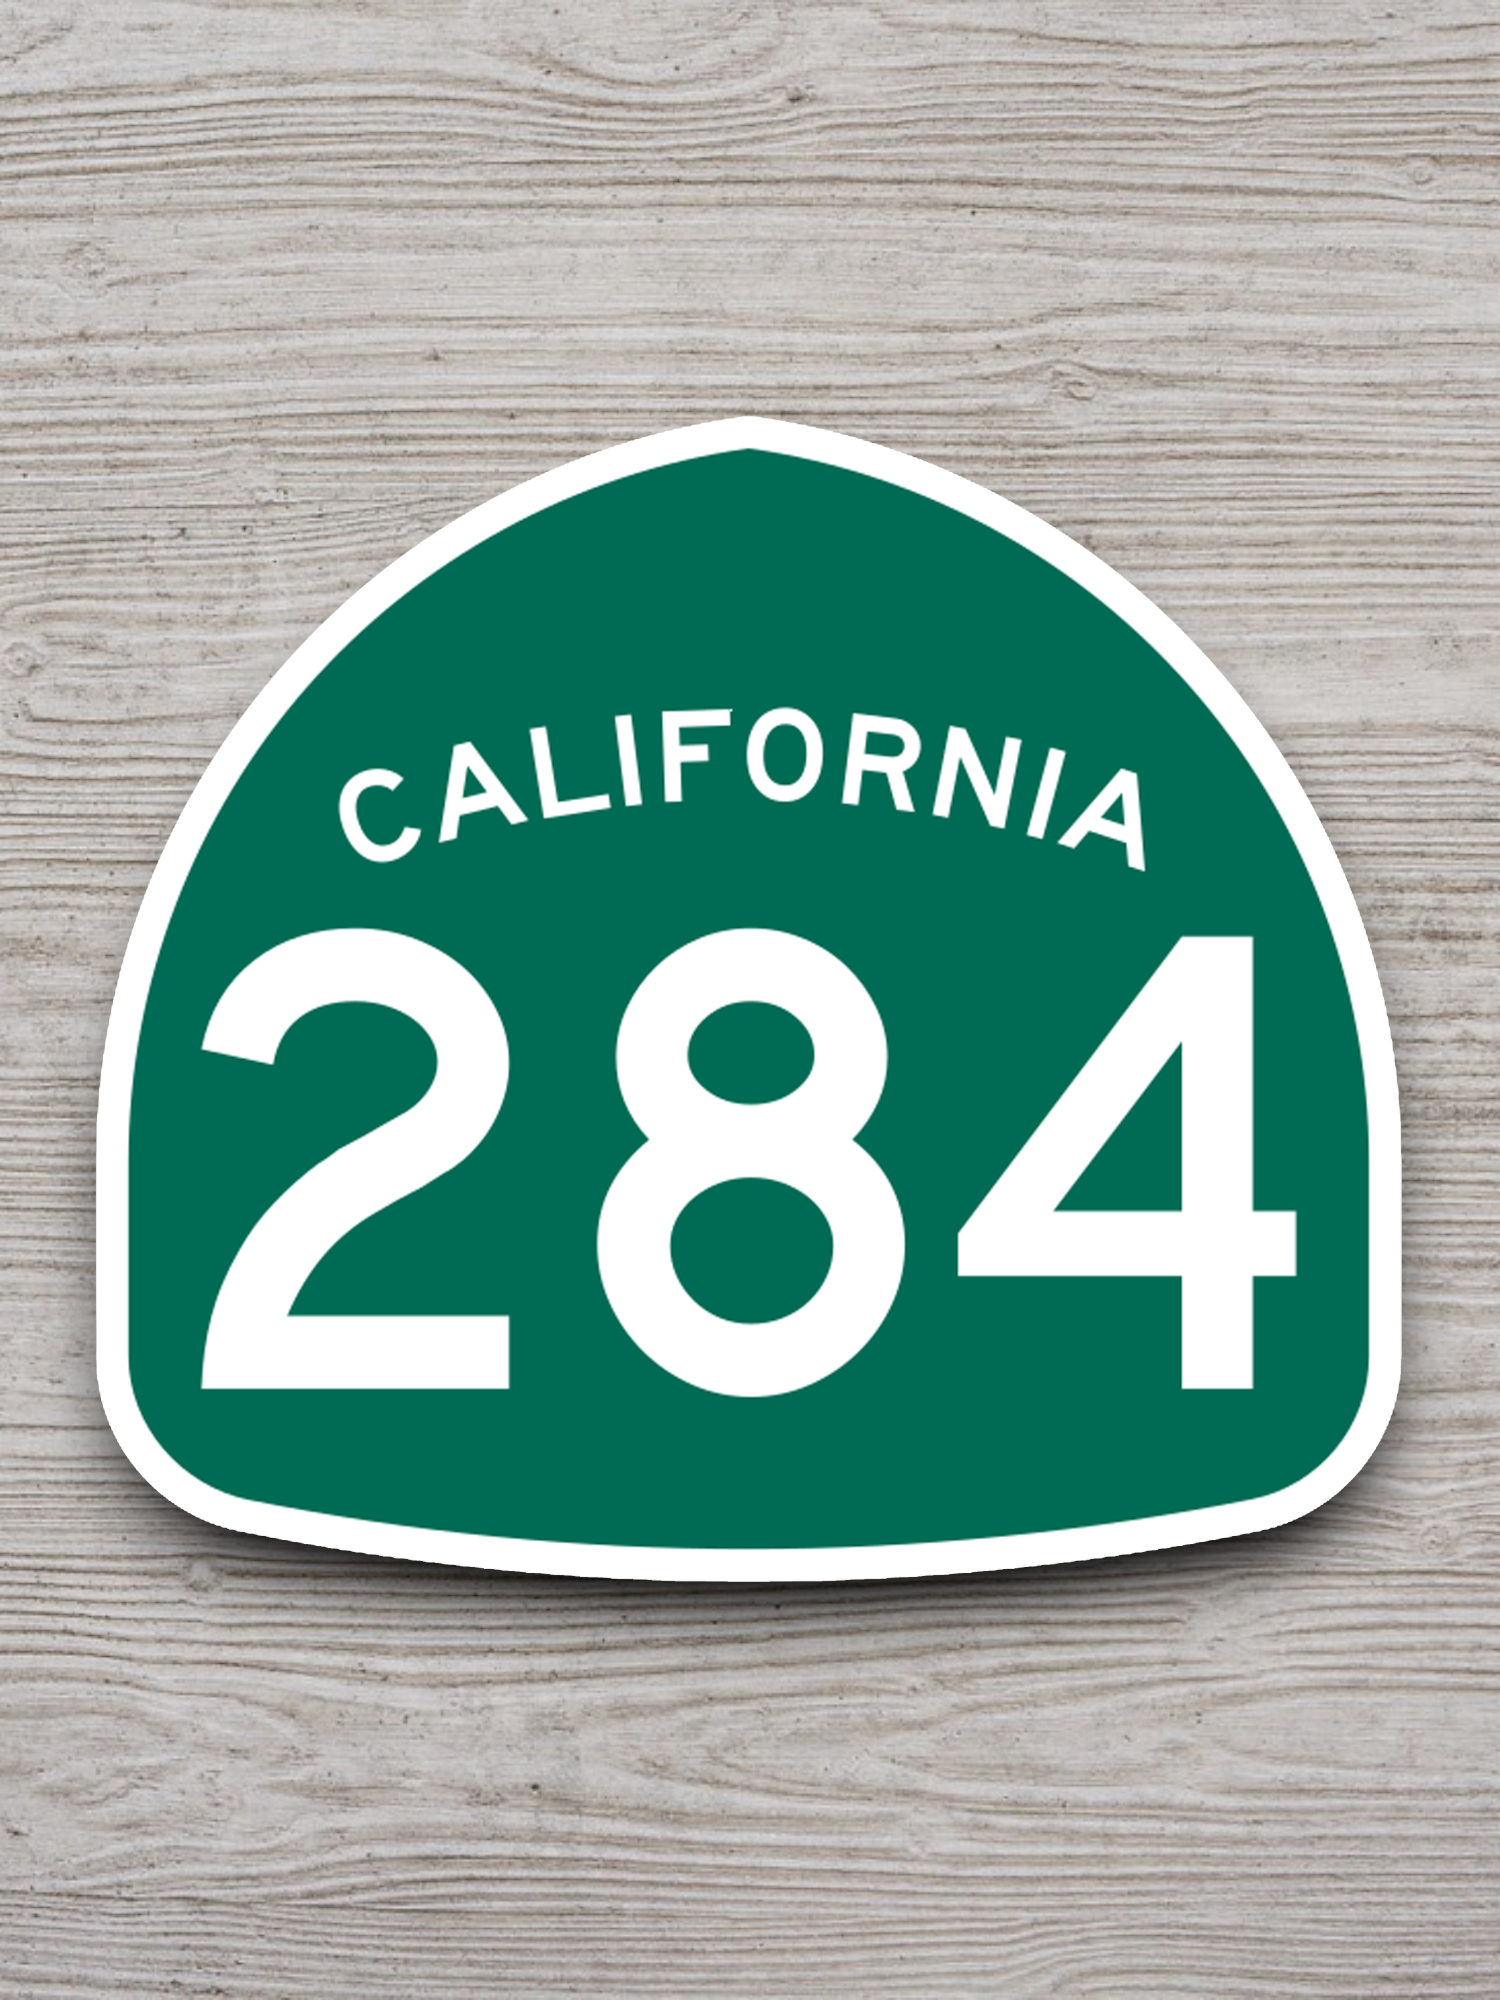 California State Route 284 Road Sign Sticker